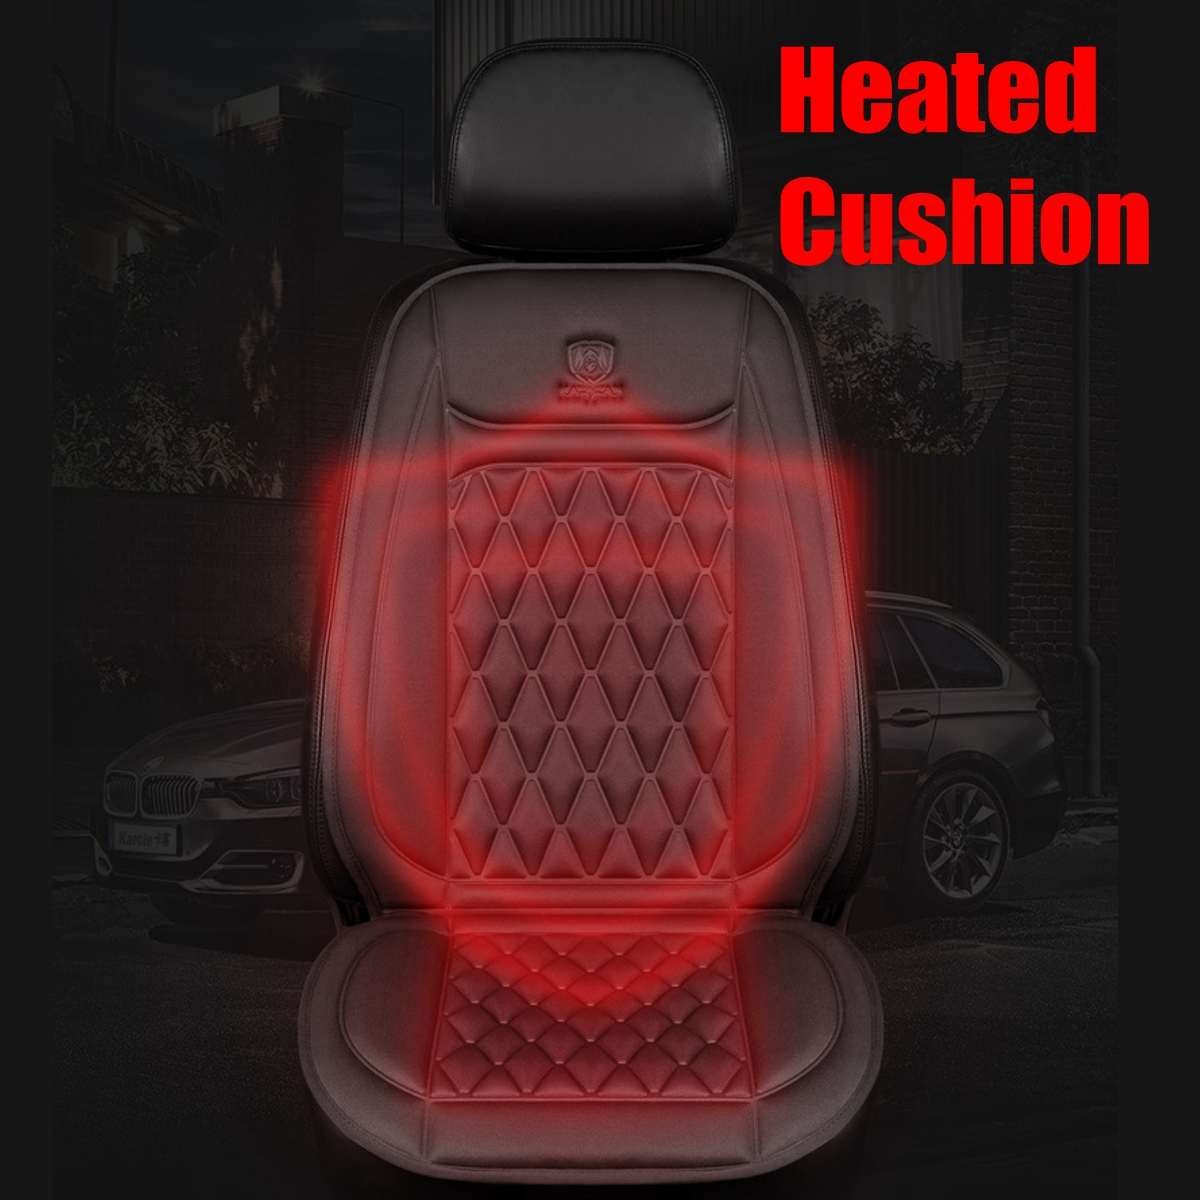 12V~24V Universal Car Seat Cover Warm Heated Chair Cushion Cover Multifunction Automobiles Seat Covers 3 Speed Adjustable